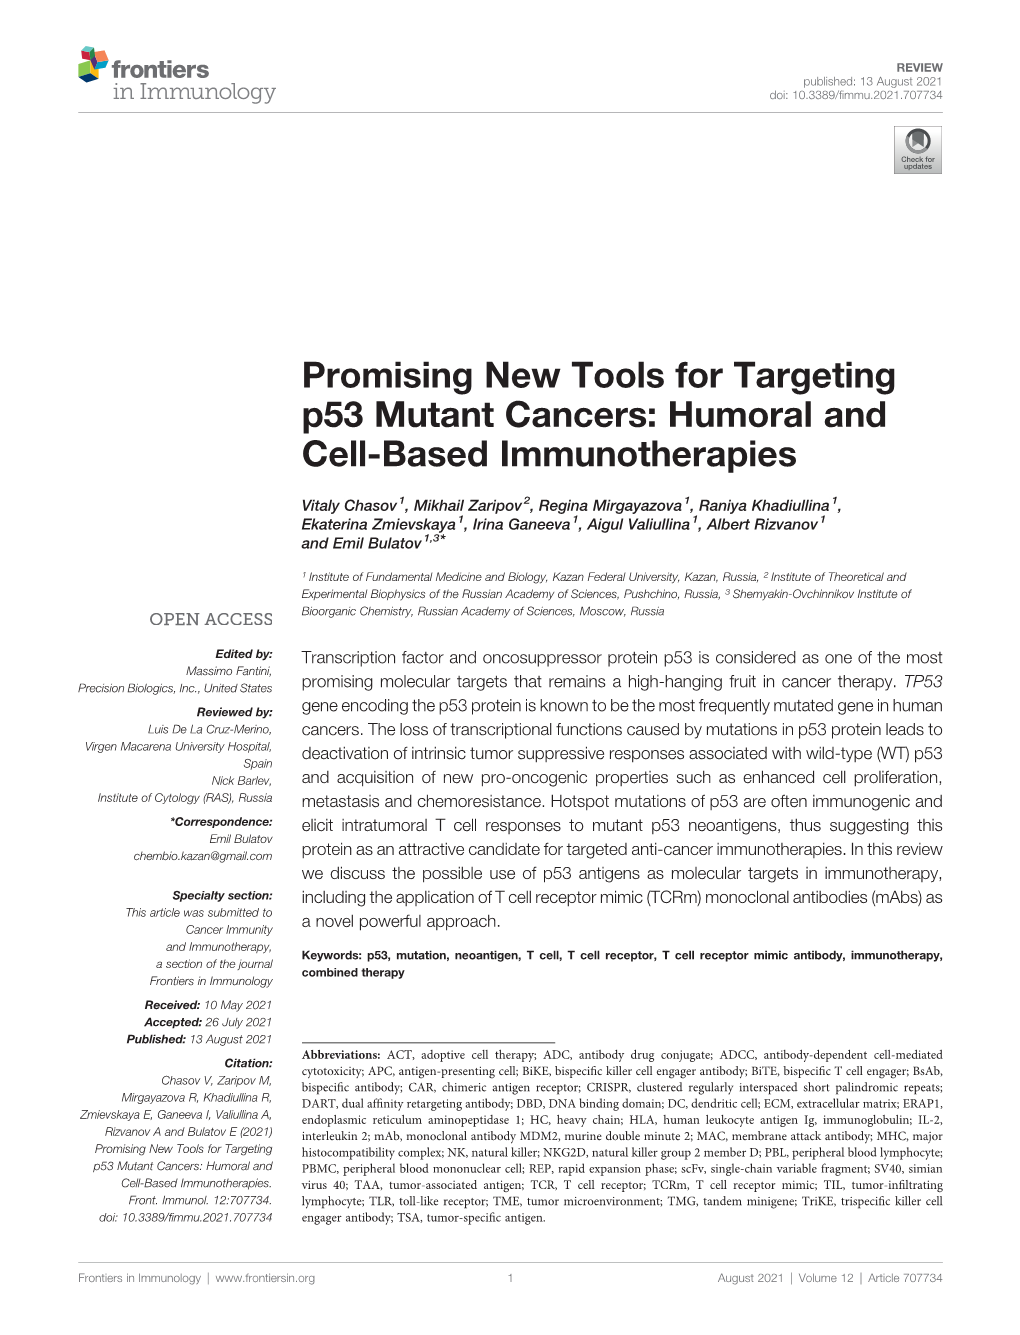 Promising New Tools for Targeting P53 Mutant Cancers: Humoral and Cell-Based Immunotherapies